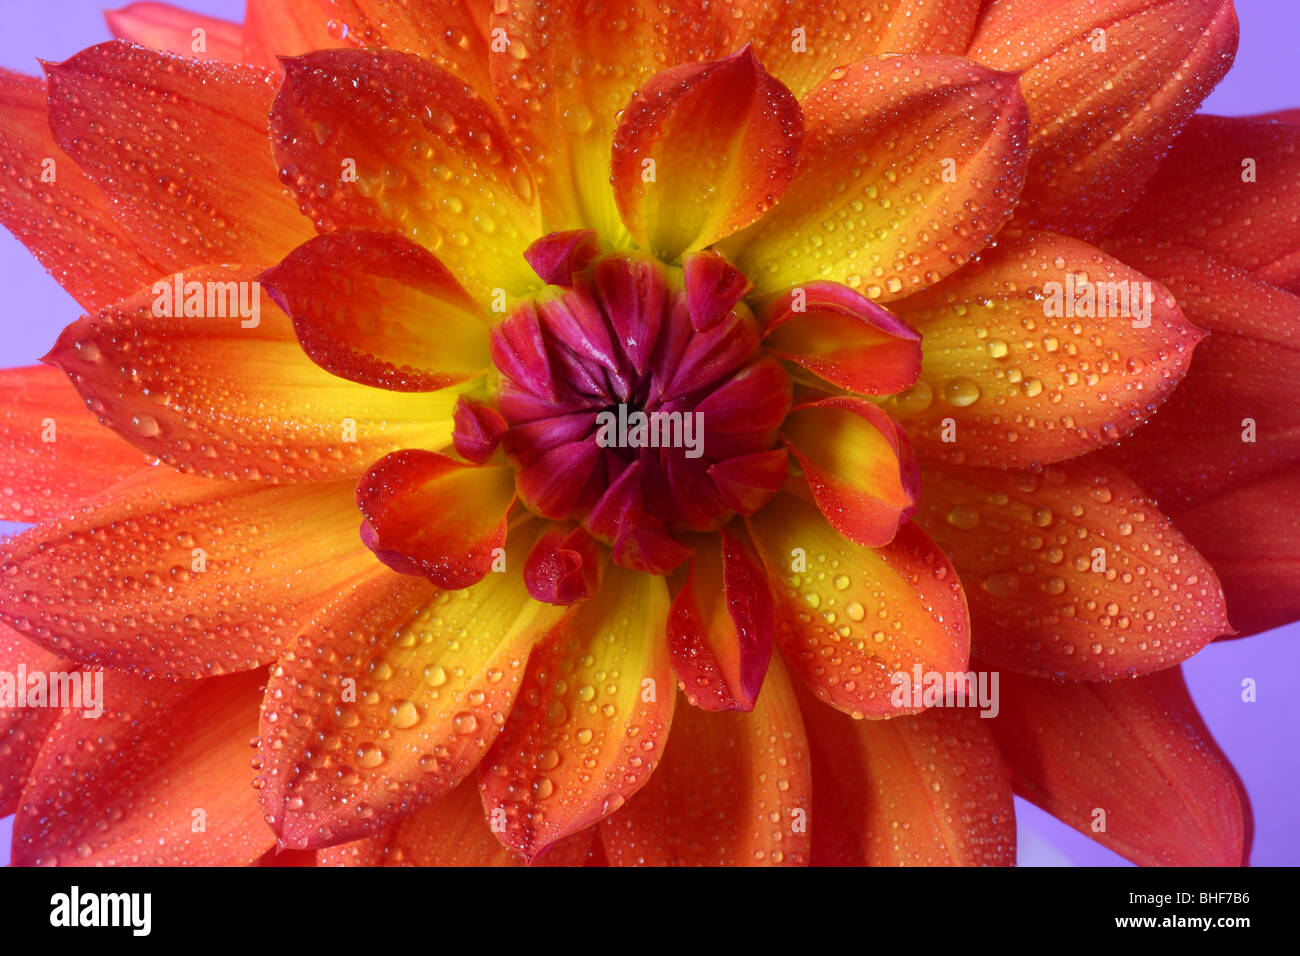 Extreme close up of center of orange, yellow and purple dahlia with water drops and a purple background. Stock Photo